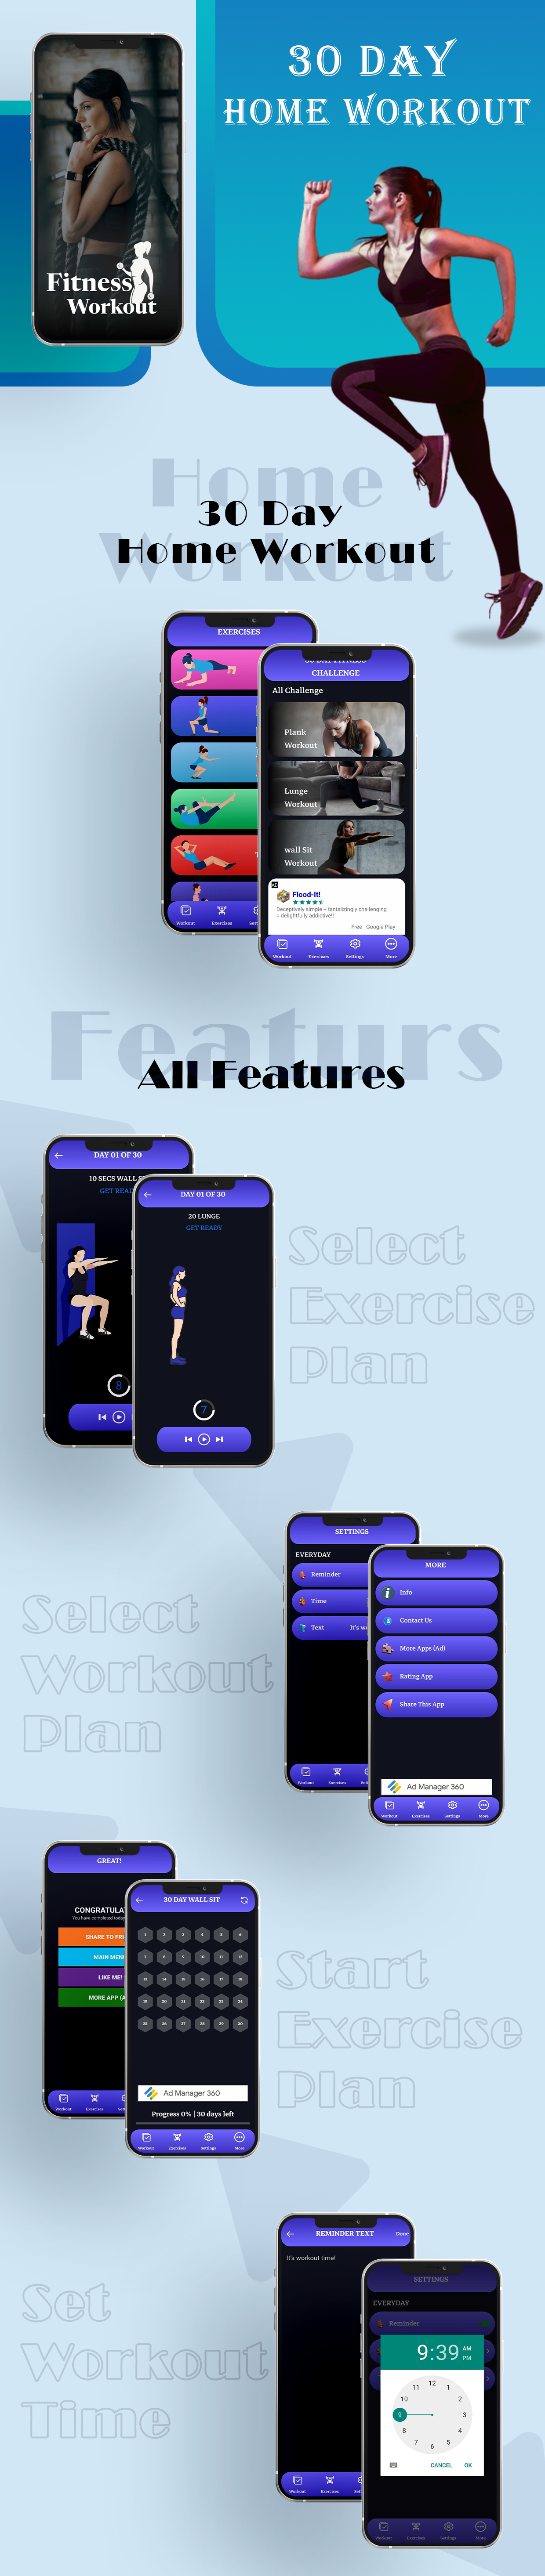 30 Days Home Workout |Full Android App | Admob Ads - 1